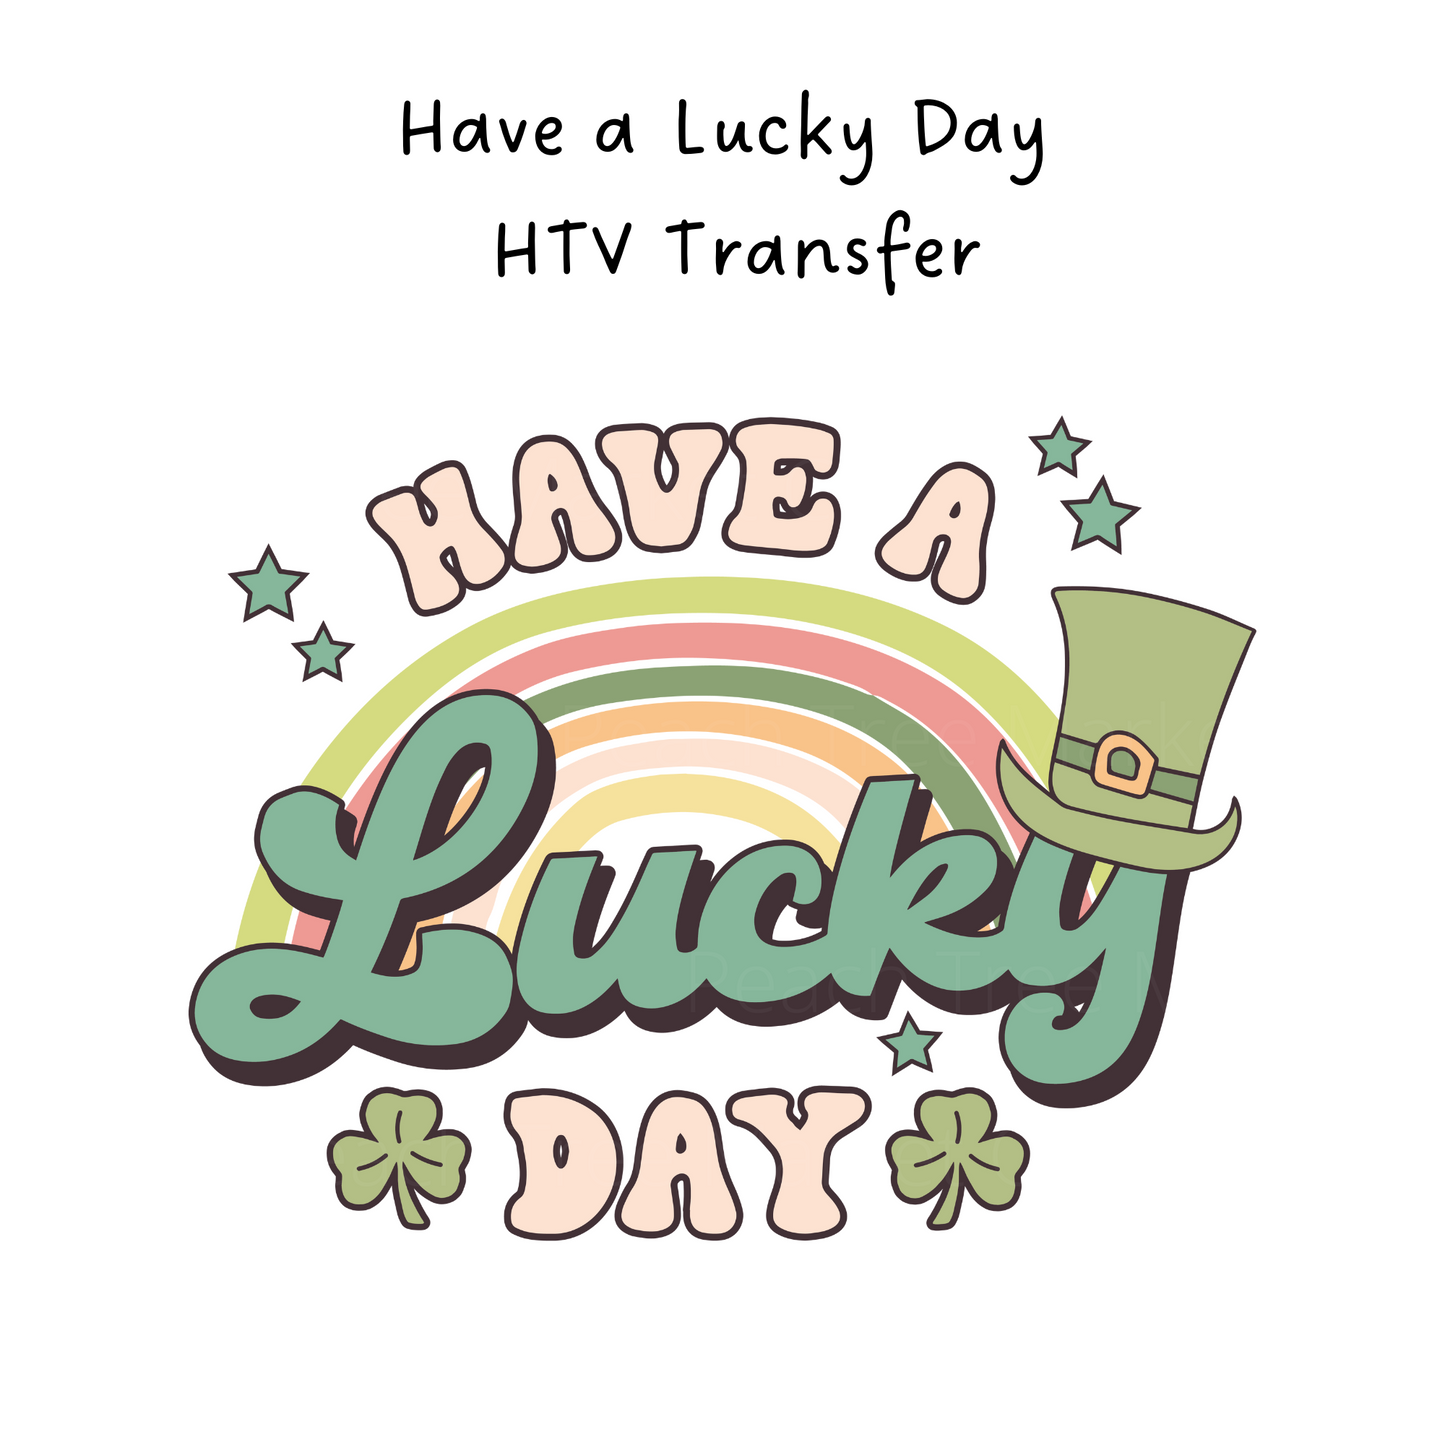 Have a Lucky Day HTV Transfer